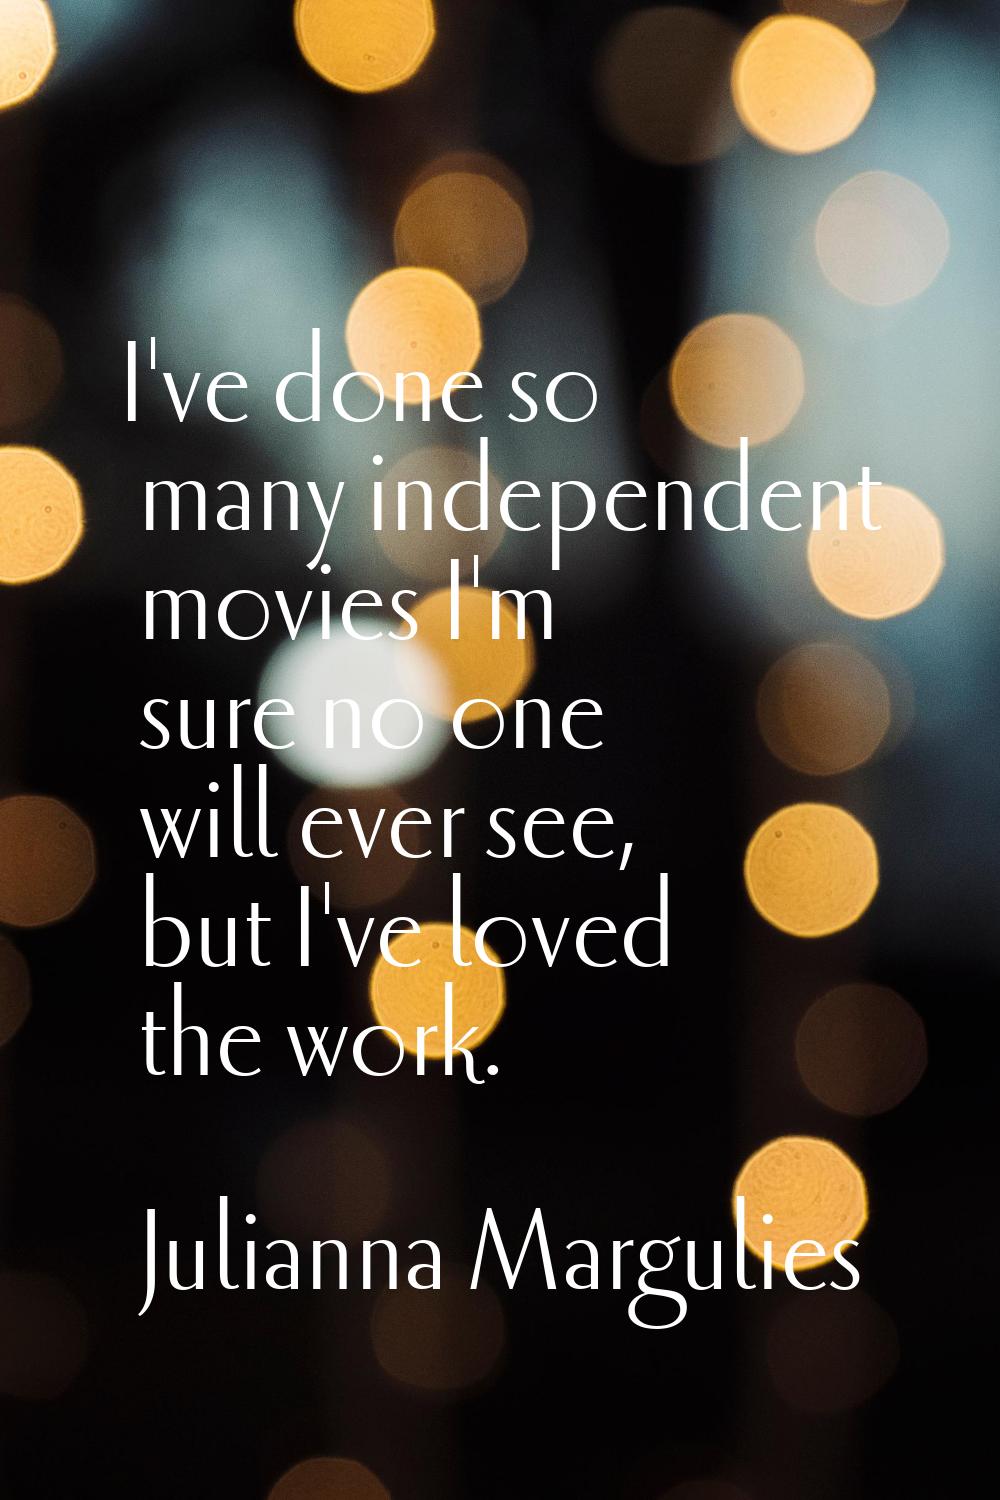 I've done so many independent movies I'm sure no one will ever see, but I've loved the work.